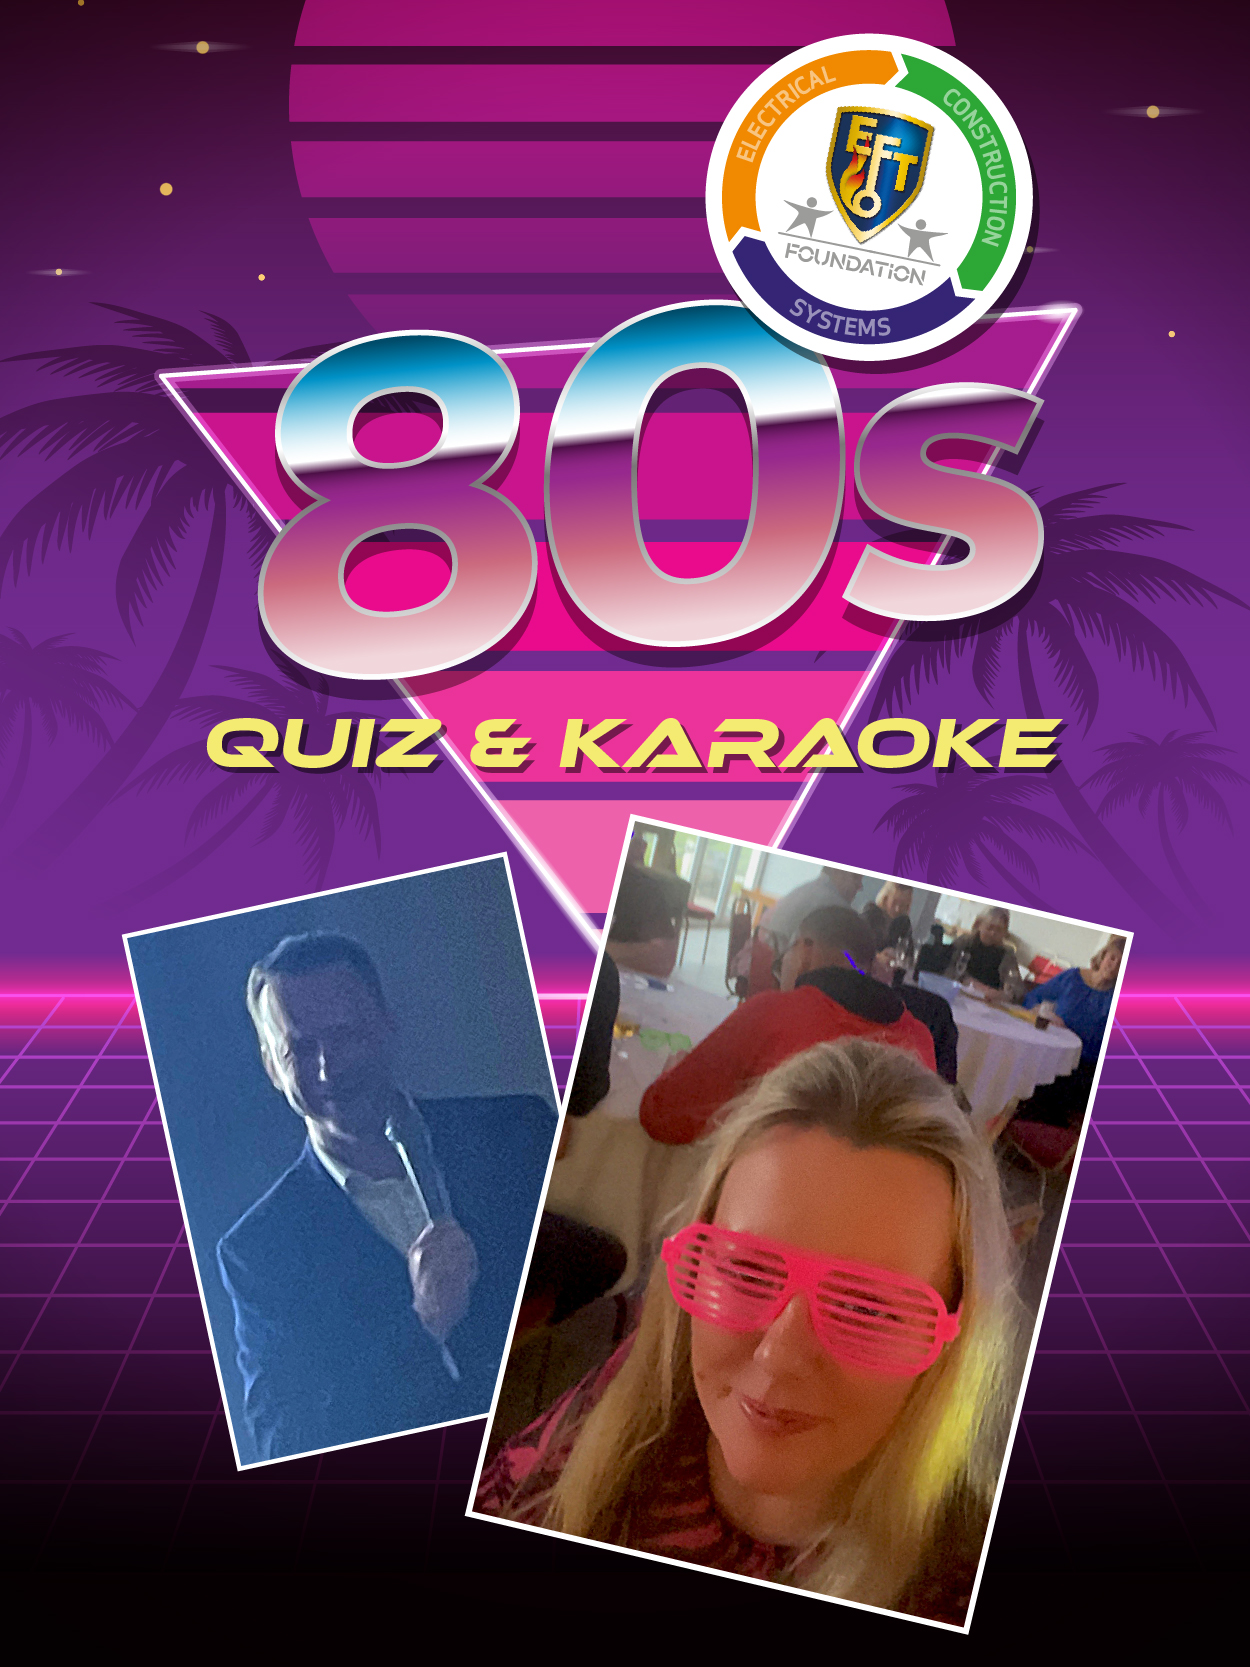 Back to the 80s for Charity!